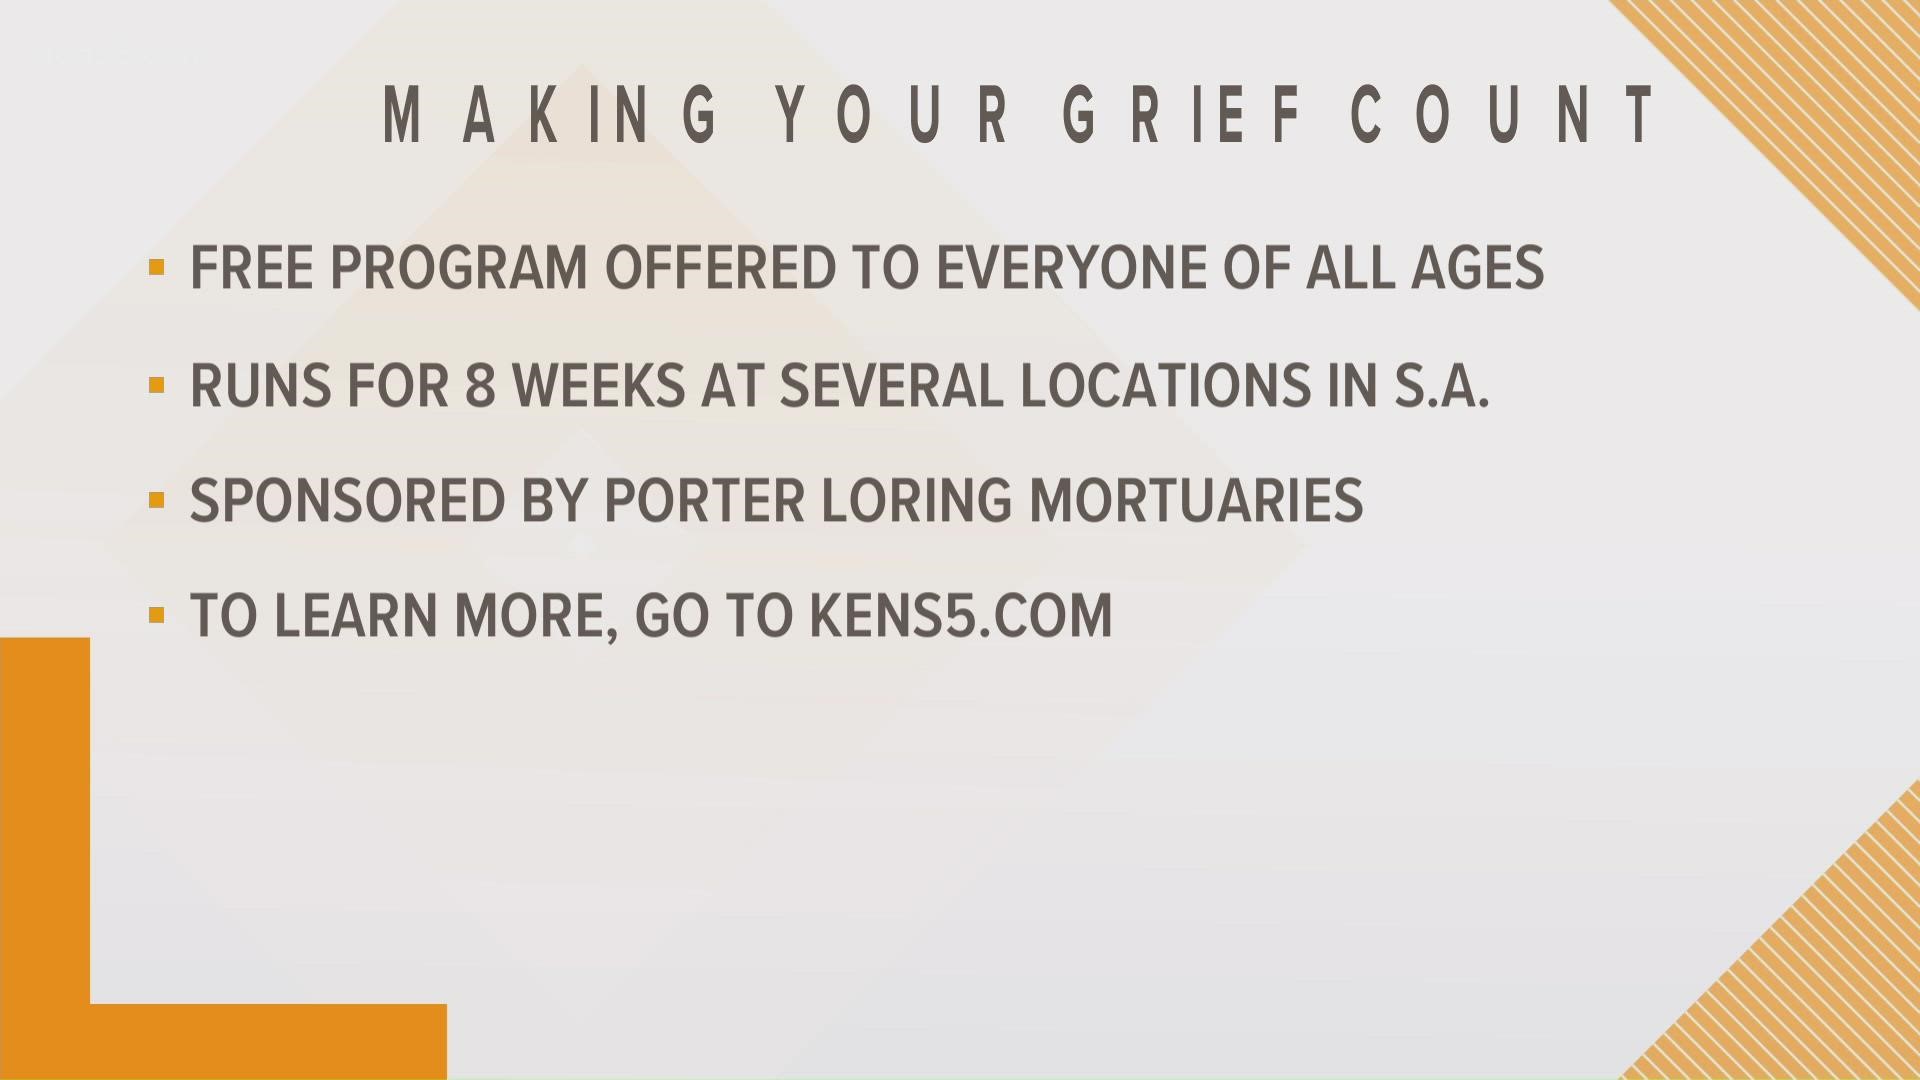 It's estimated that over 3,600 Bexar County residents have died from COVID-19. Beginning August 2, Porter Loring is offering grief support to those struggling.